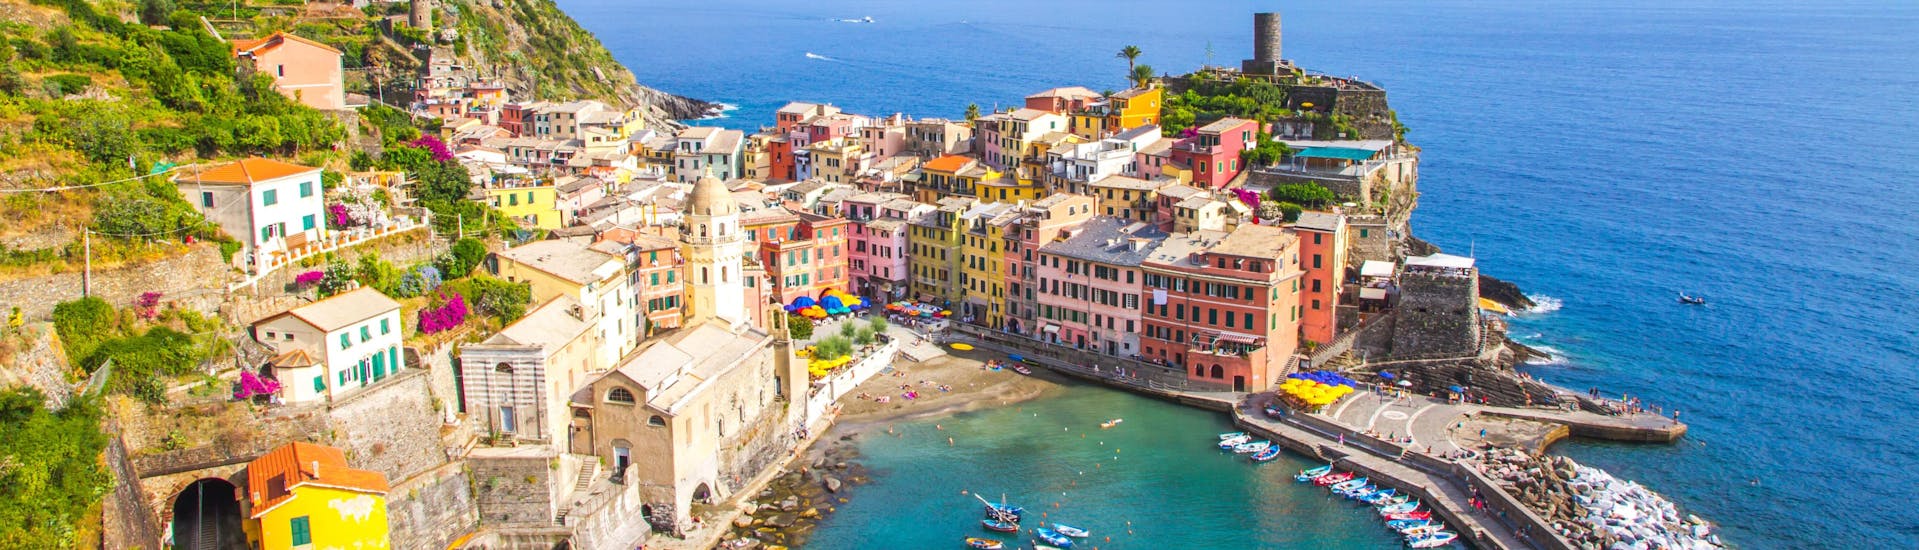 View of the colorful port of Liguria, Cinque Terre, a popular destination for boat tours.